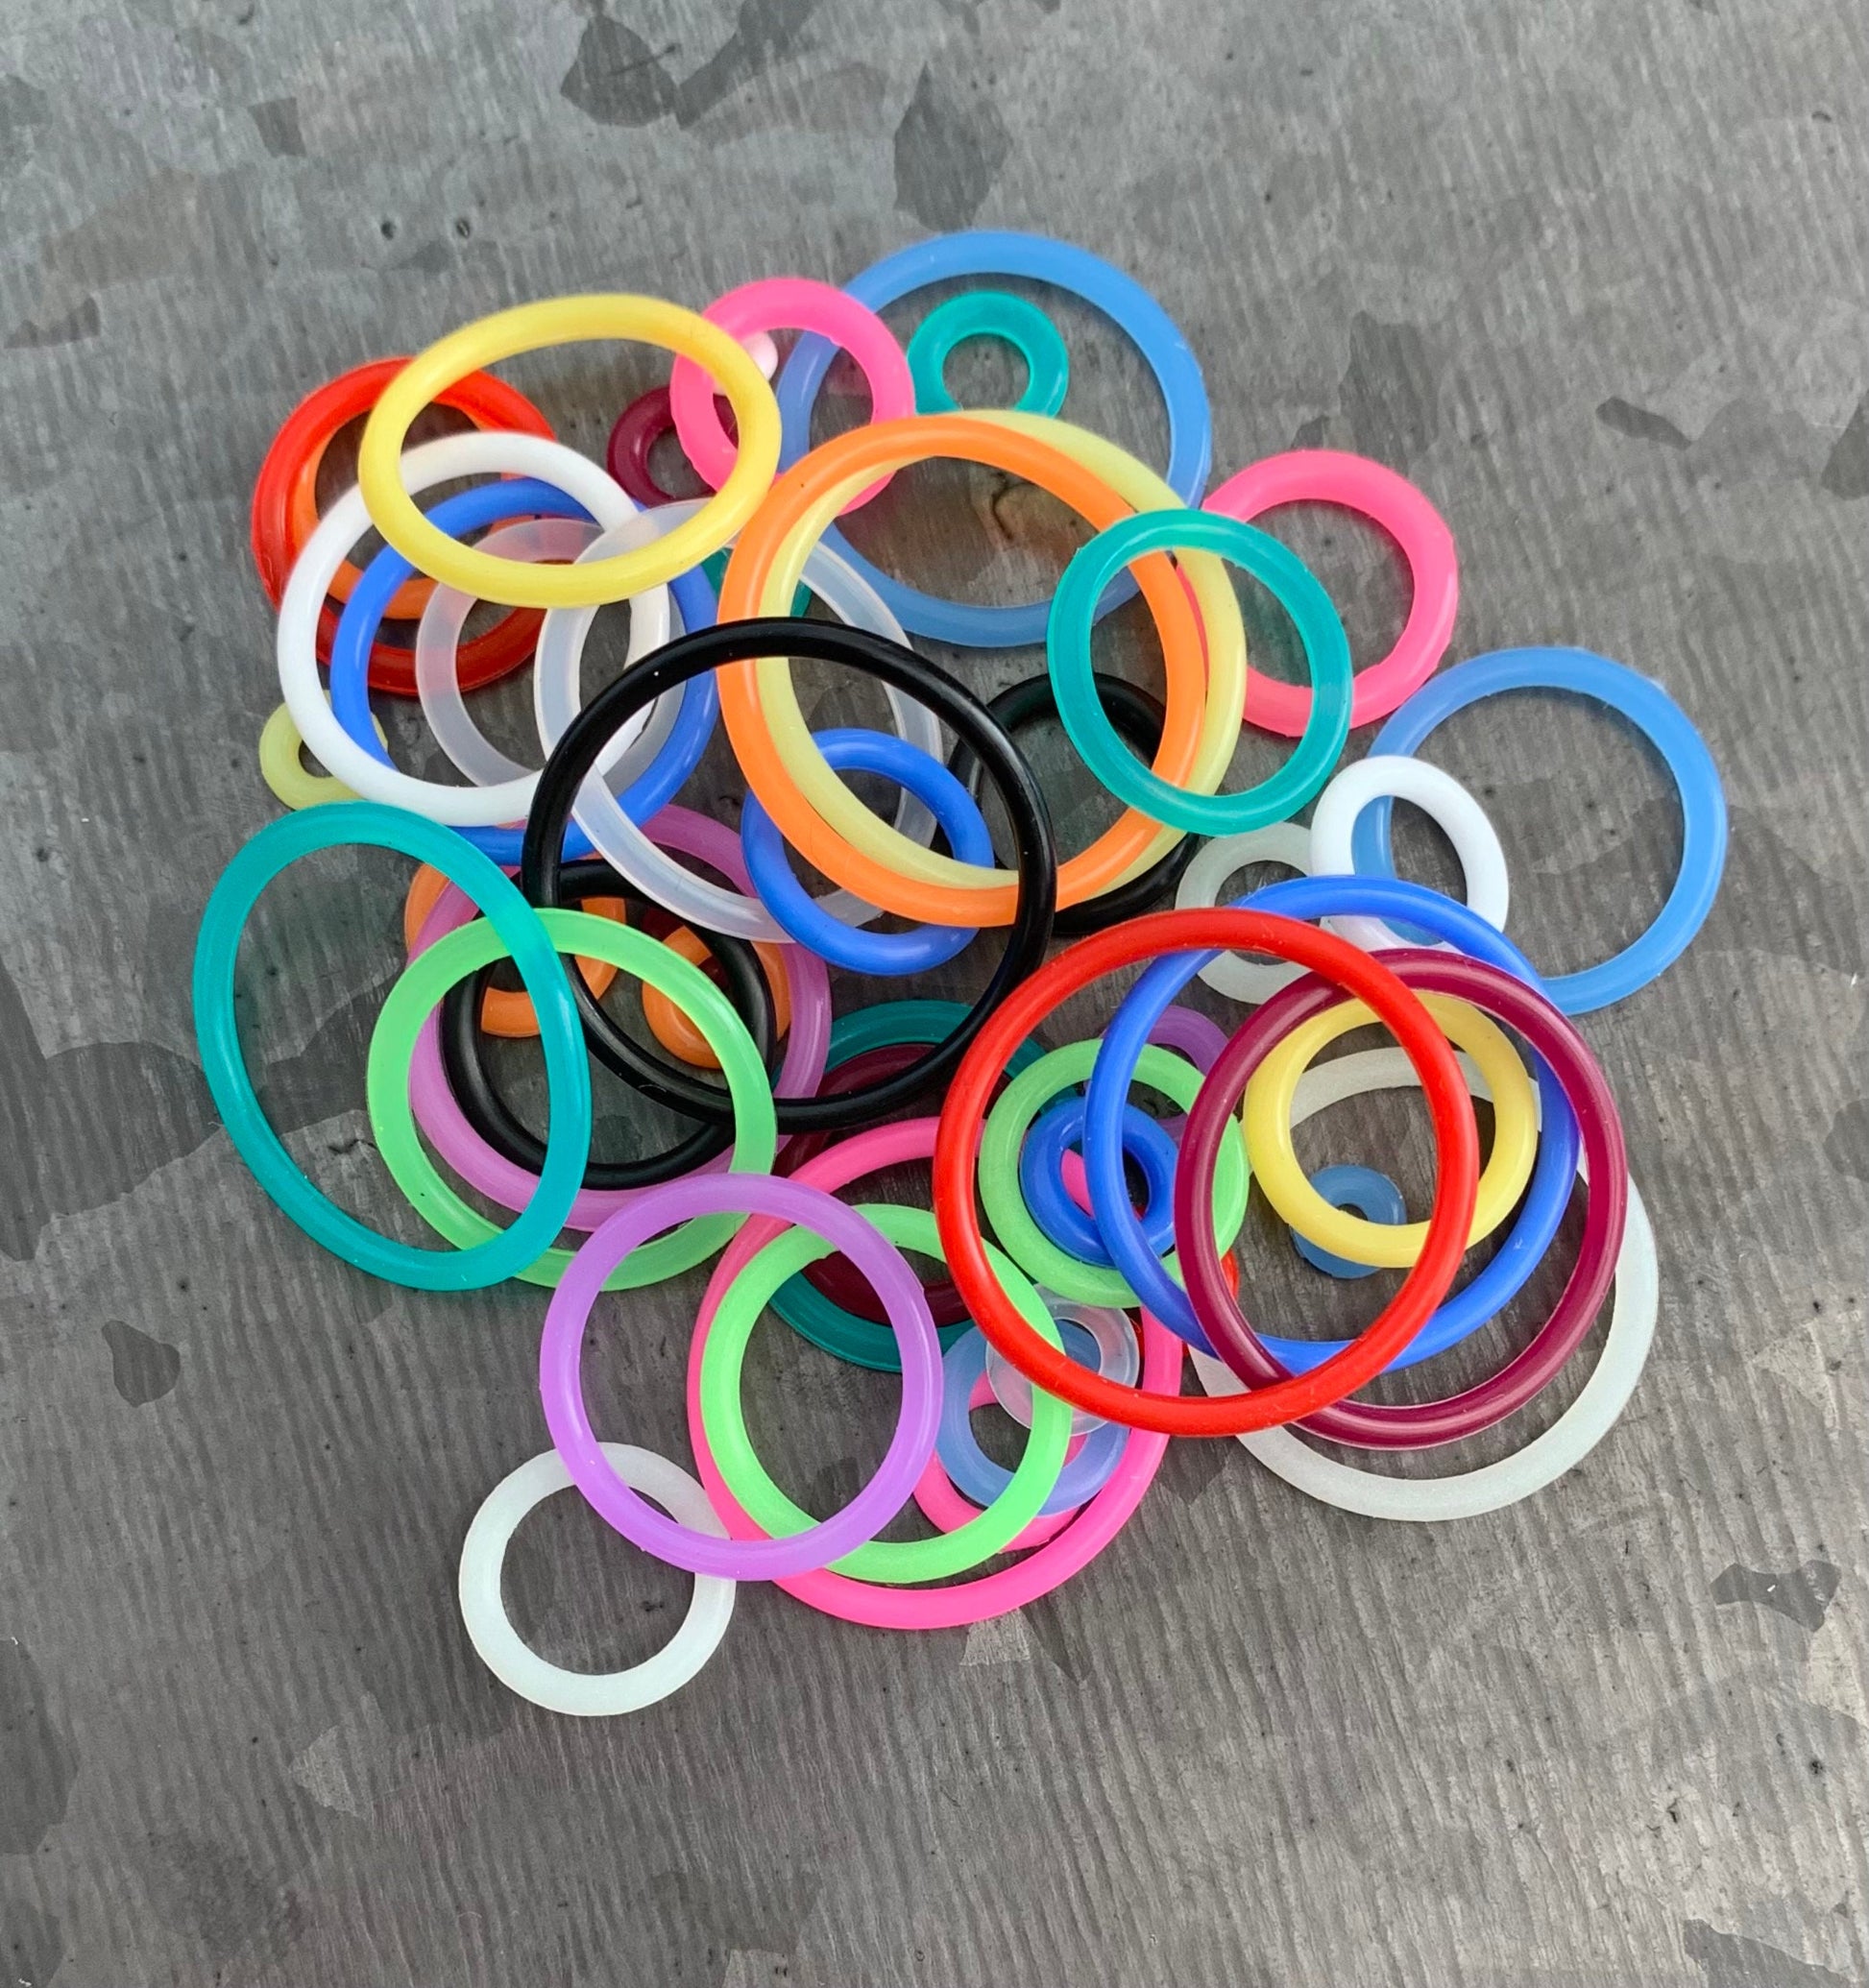 10 pack of Pink Replacement O-Rings Bands for Plugs or Tunnels - 13 more colors available!